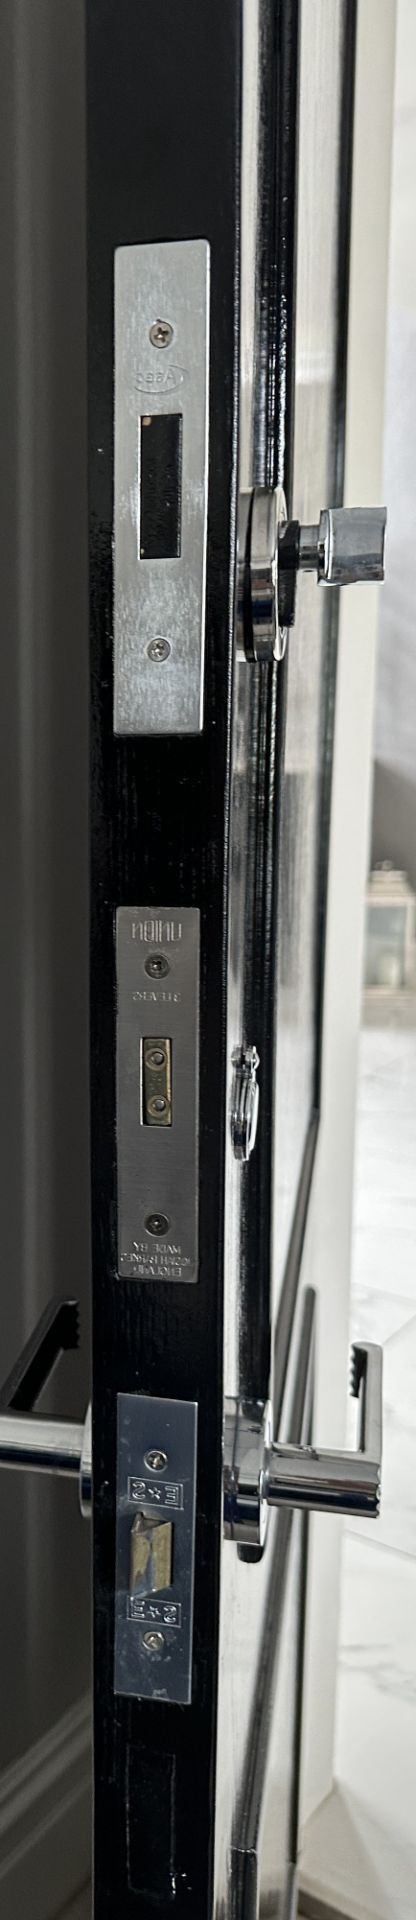 1 x SOLID OAK Fire Door In Black Gloss And Stainless Steel Hardware - Image 4 of 4